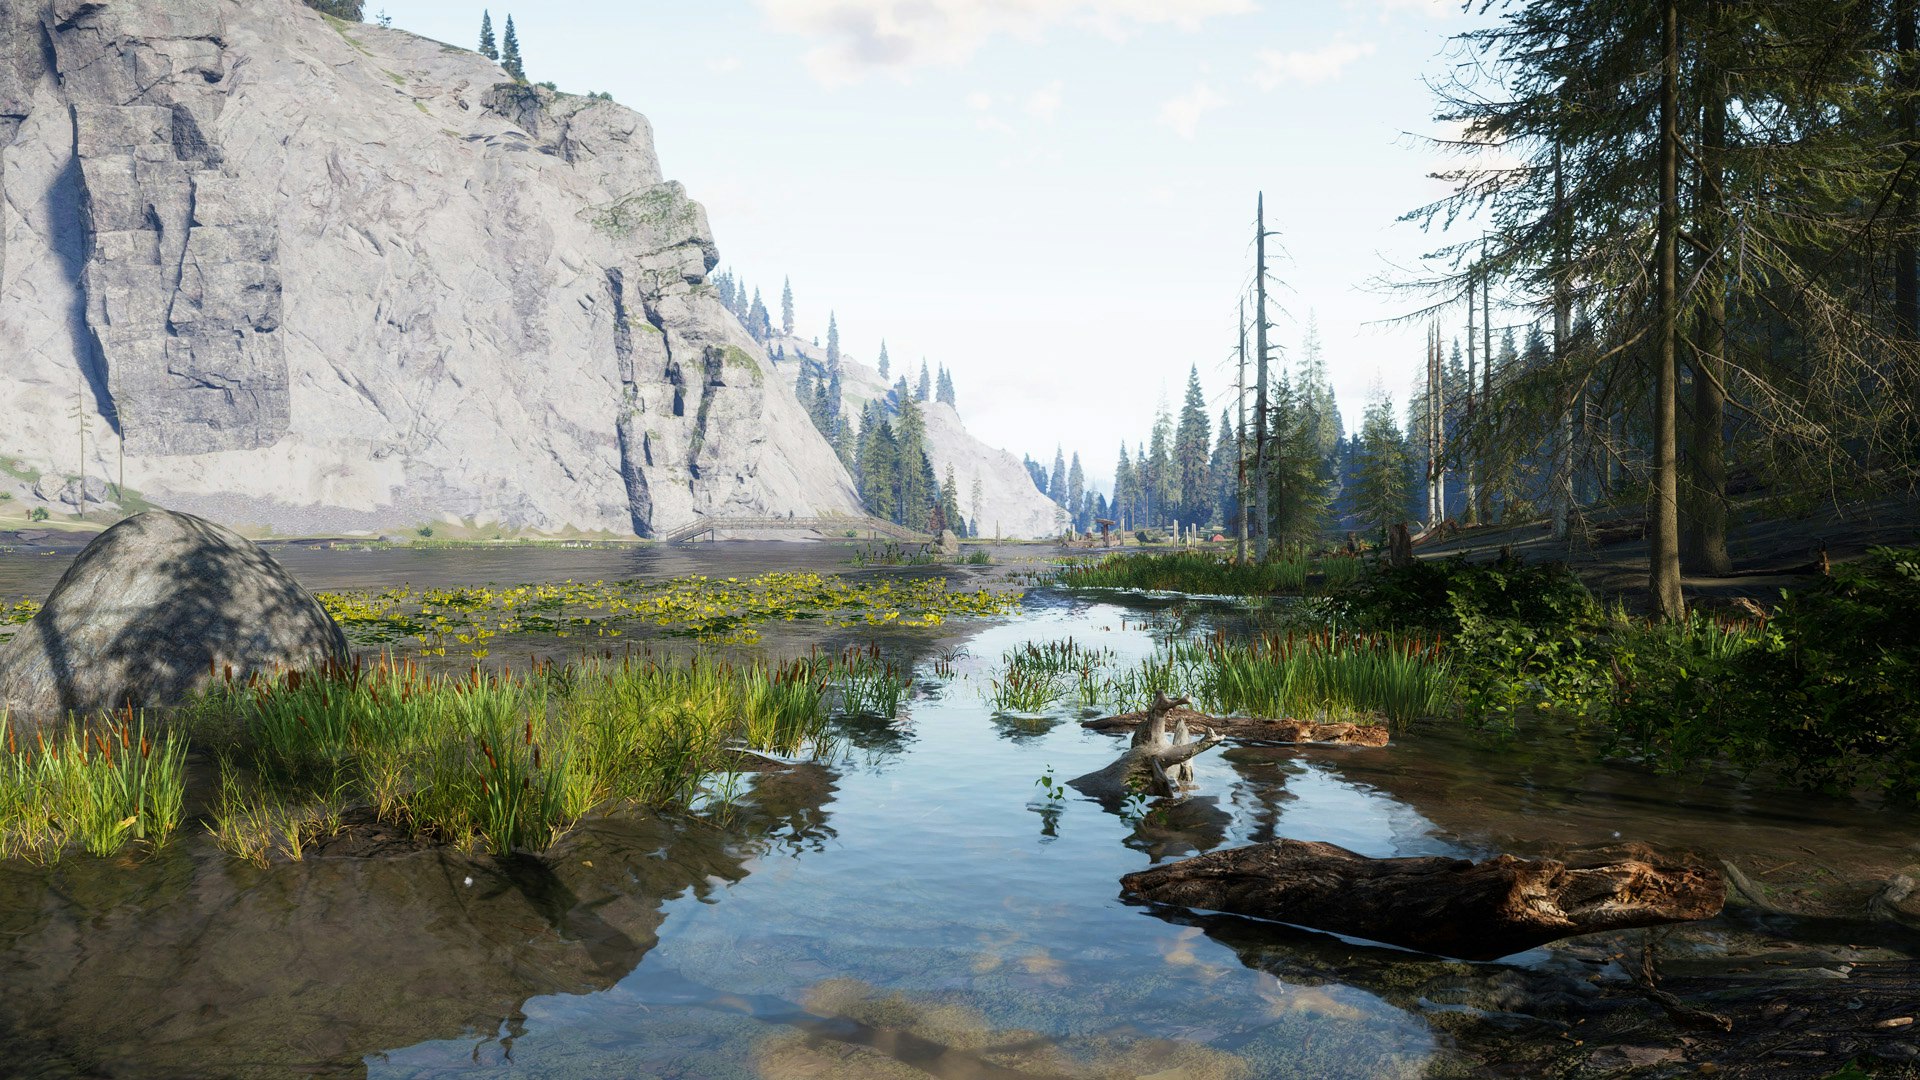 A secluded shallow waterway in Call of the Wild: The Angler's Golden Ridge Reserve.